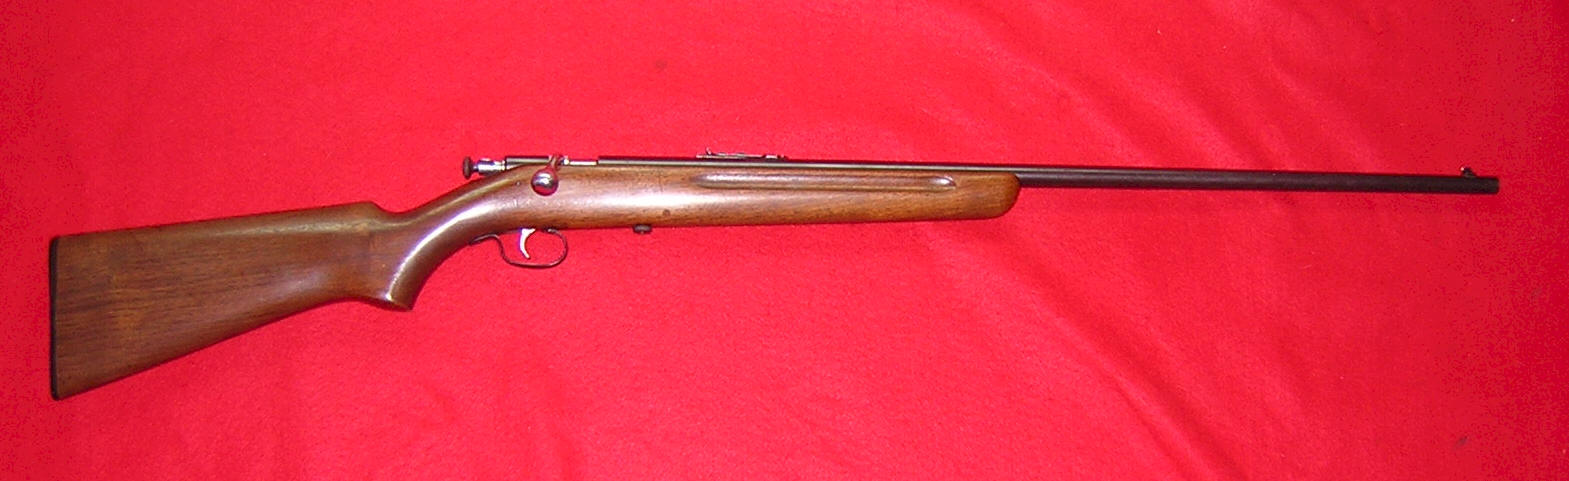 Winchester 67 parts